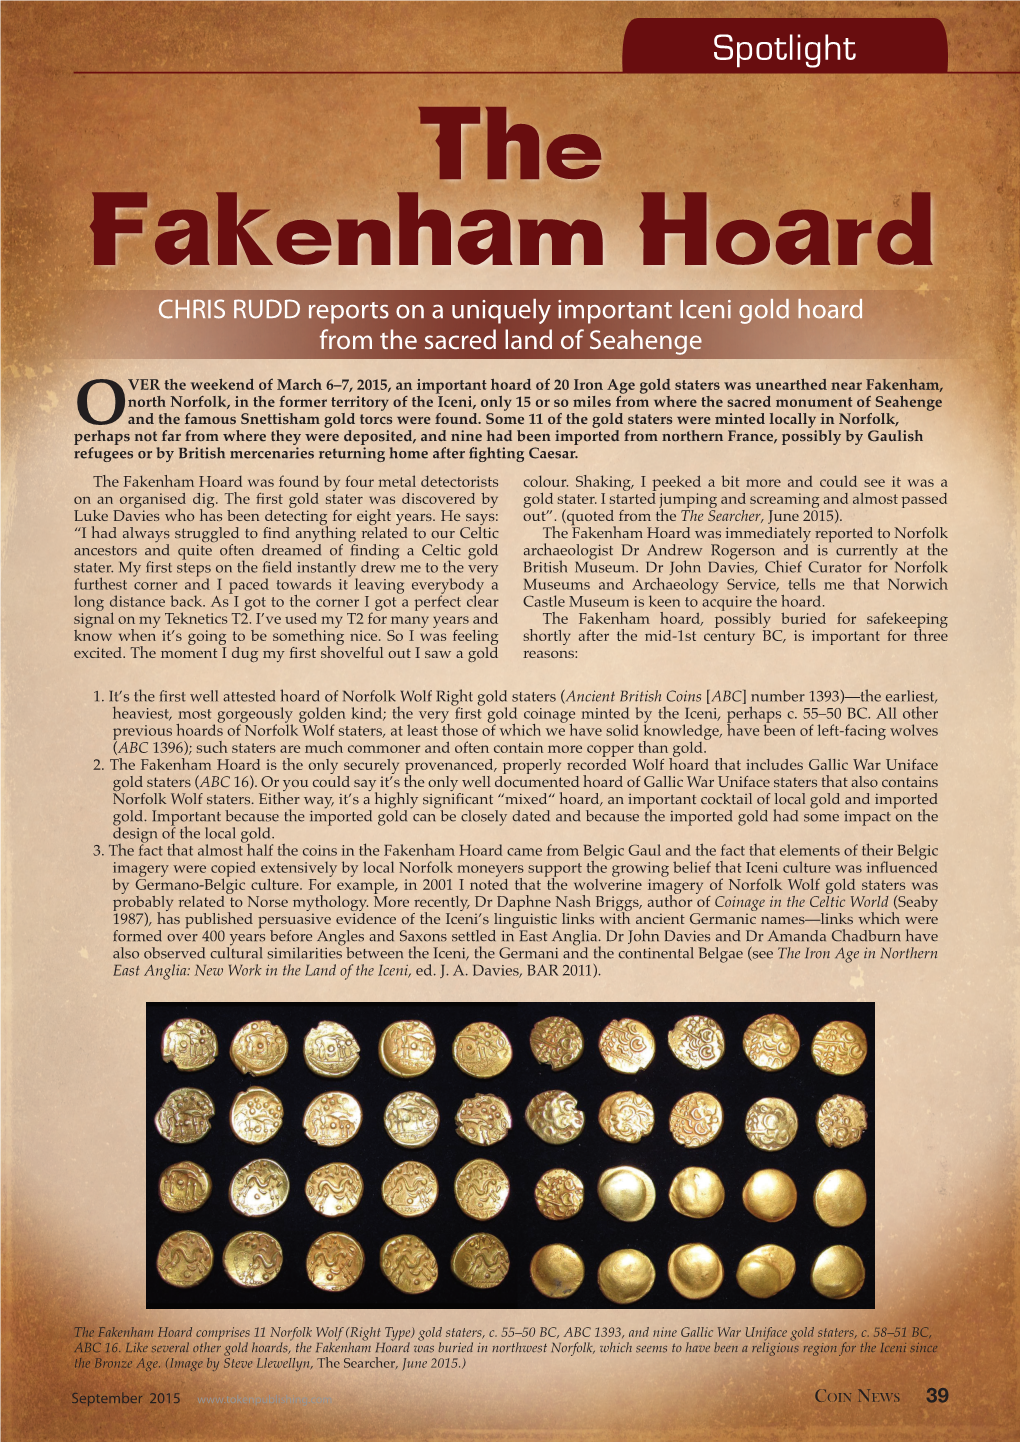 The Fakenham Hoard CHRIS RUDD Reports on a Uniquely Important Iceni Gold Hoard from the Sacred Land of Seahenge